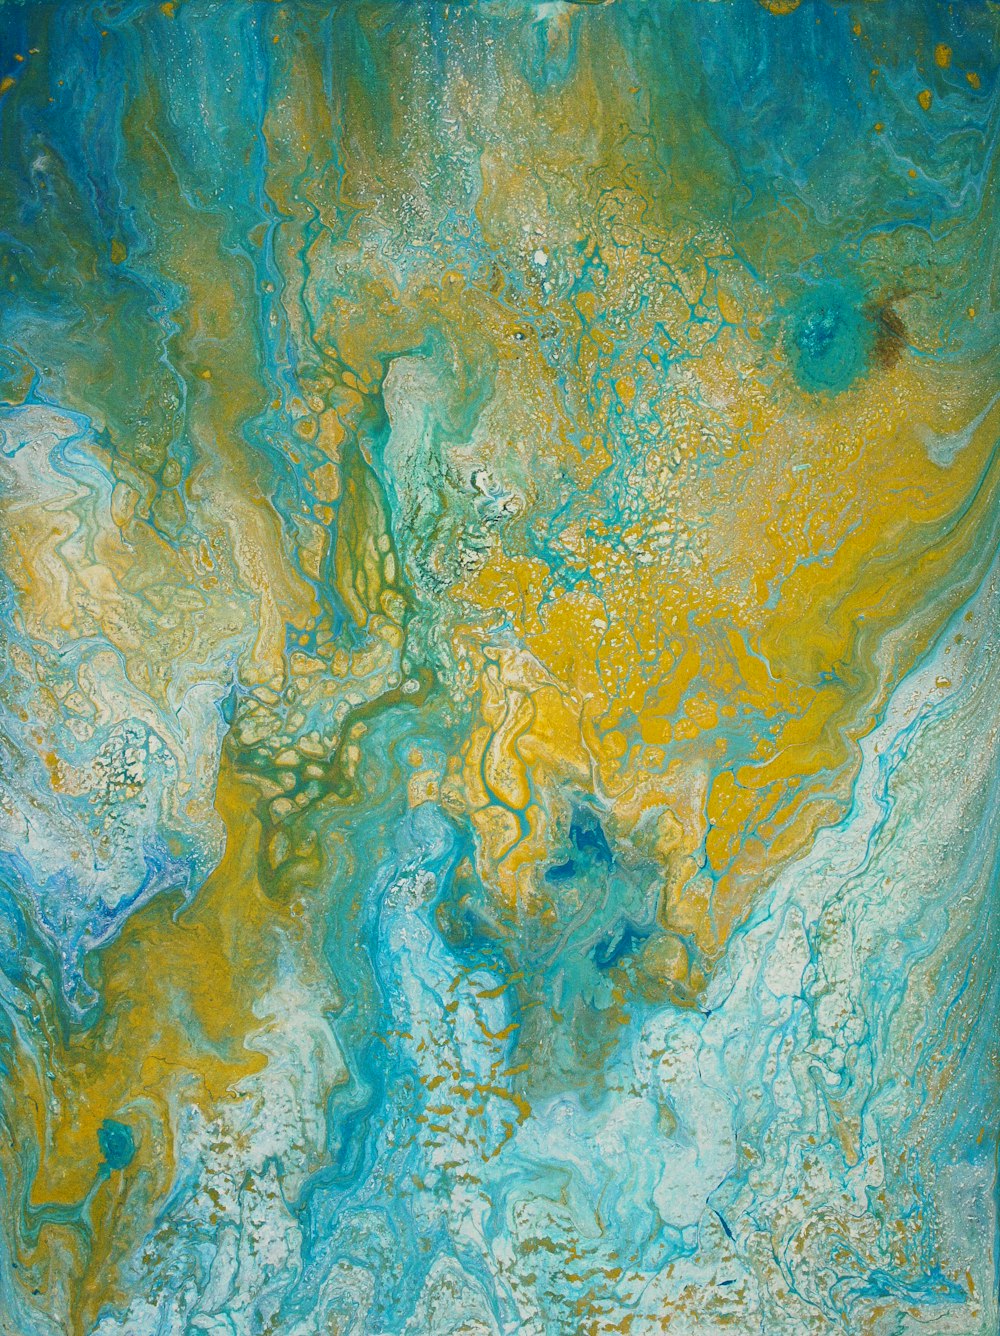 an abstract painting with blue, yellow, and green colors